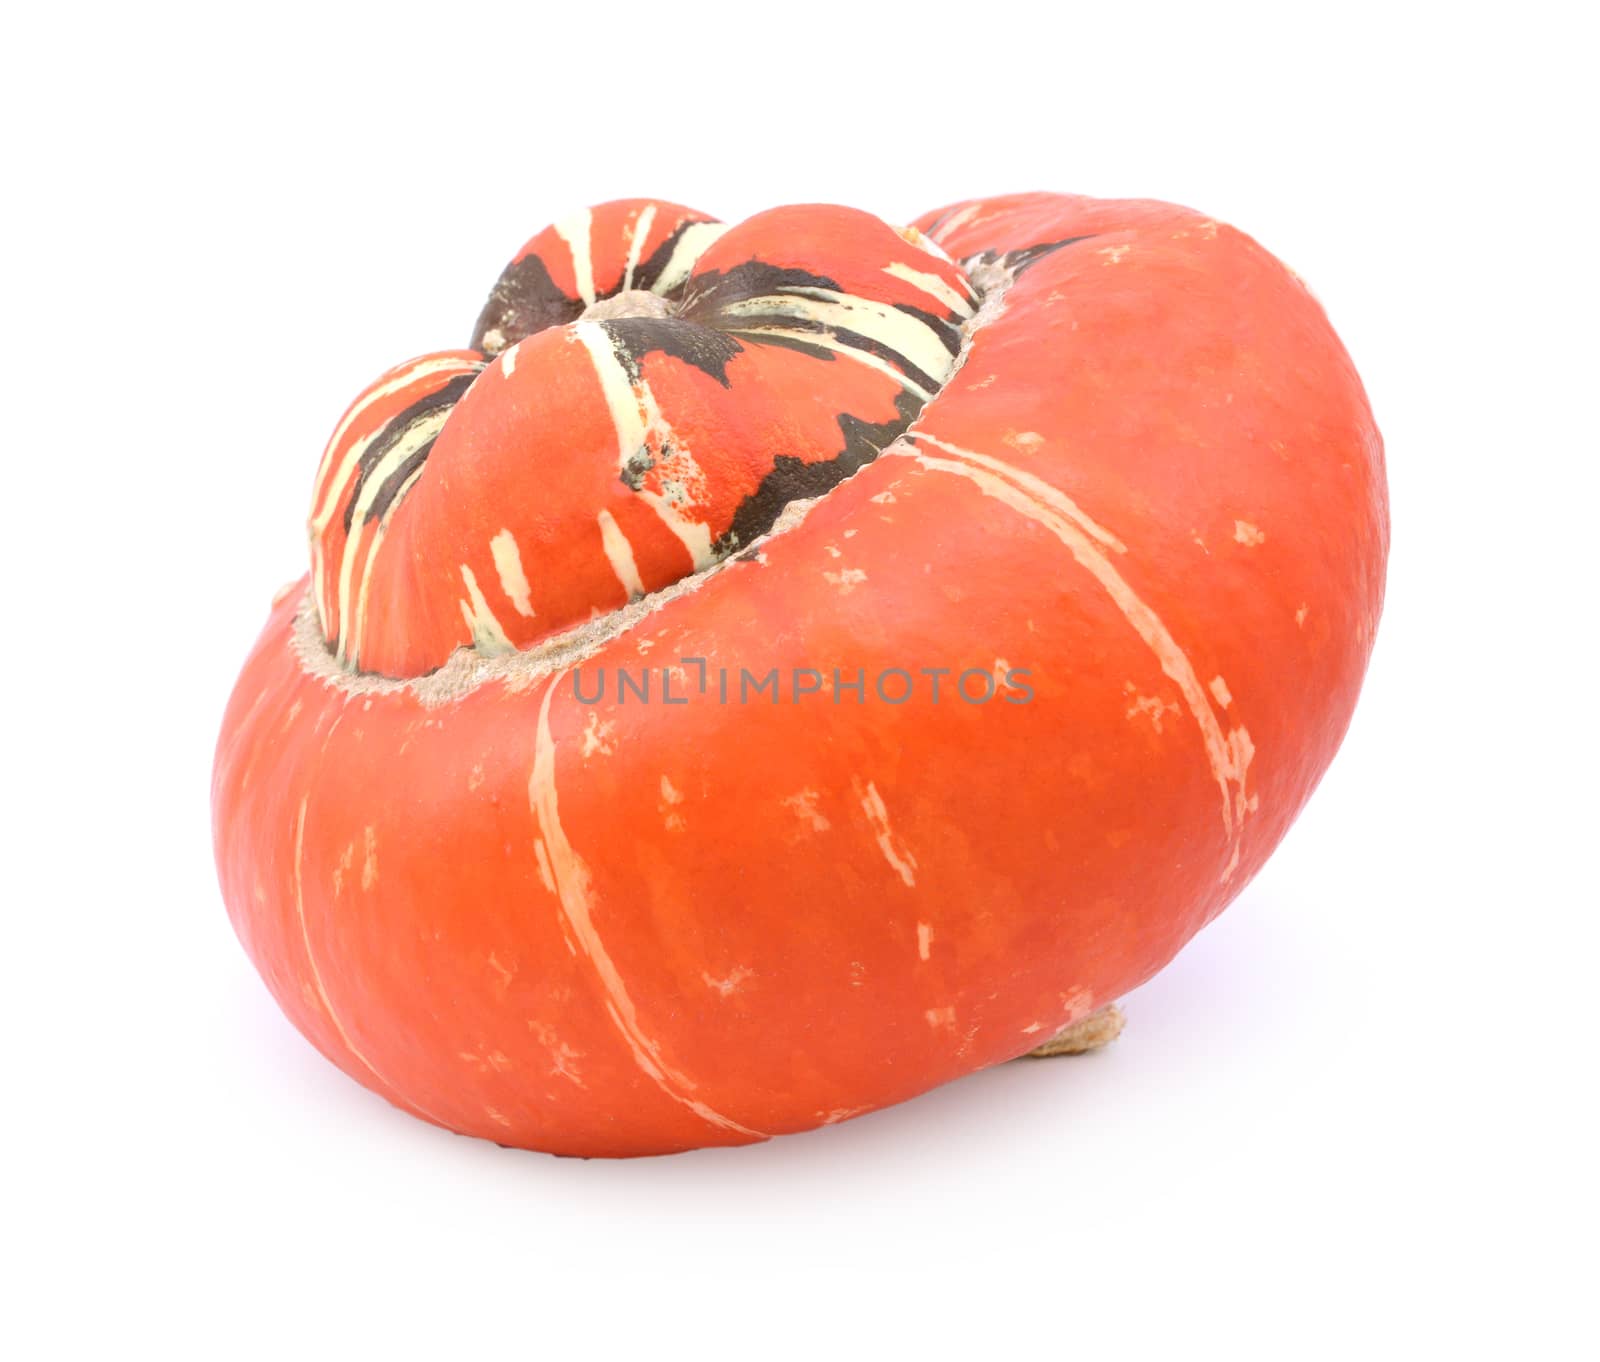 Deep orange turban squash in profile with colourful, striped cen by sarahdoow